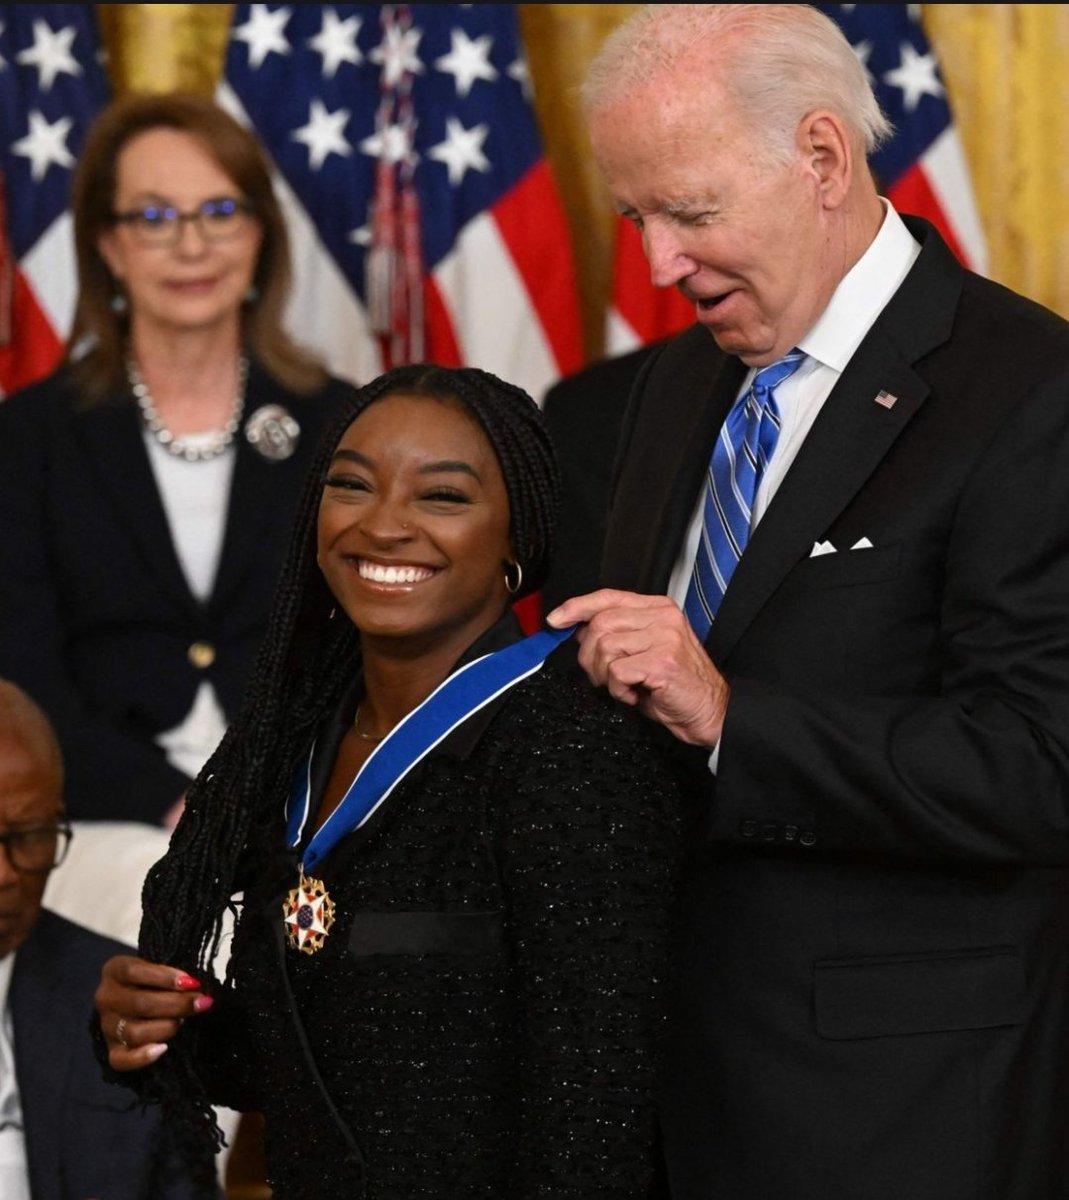 TGIF IN DC 🏅🇺🇲🏅 12:30pm POTUS & VP receive the PDB 4:30pm @POTUS presents the Presidential Medals of Freedom ceremony to Rep Clyburn, Speaker Pelosi, Al Gore, Opal Lee, and many more 6pm Wheels up to DE 7pm Home in Wilmington